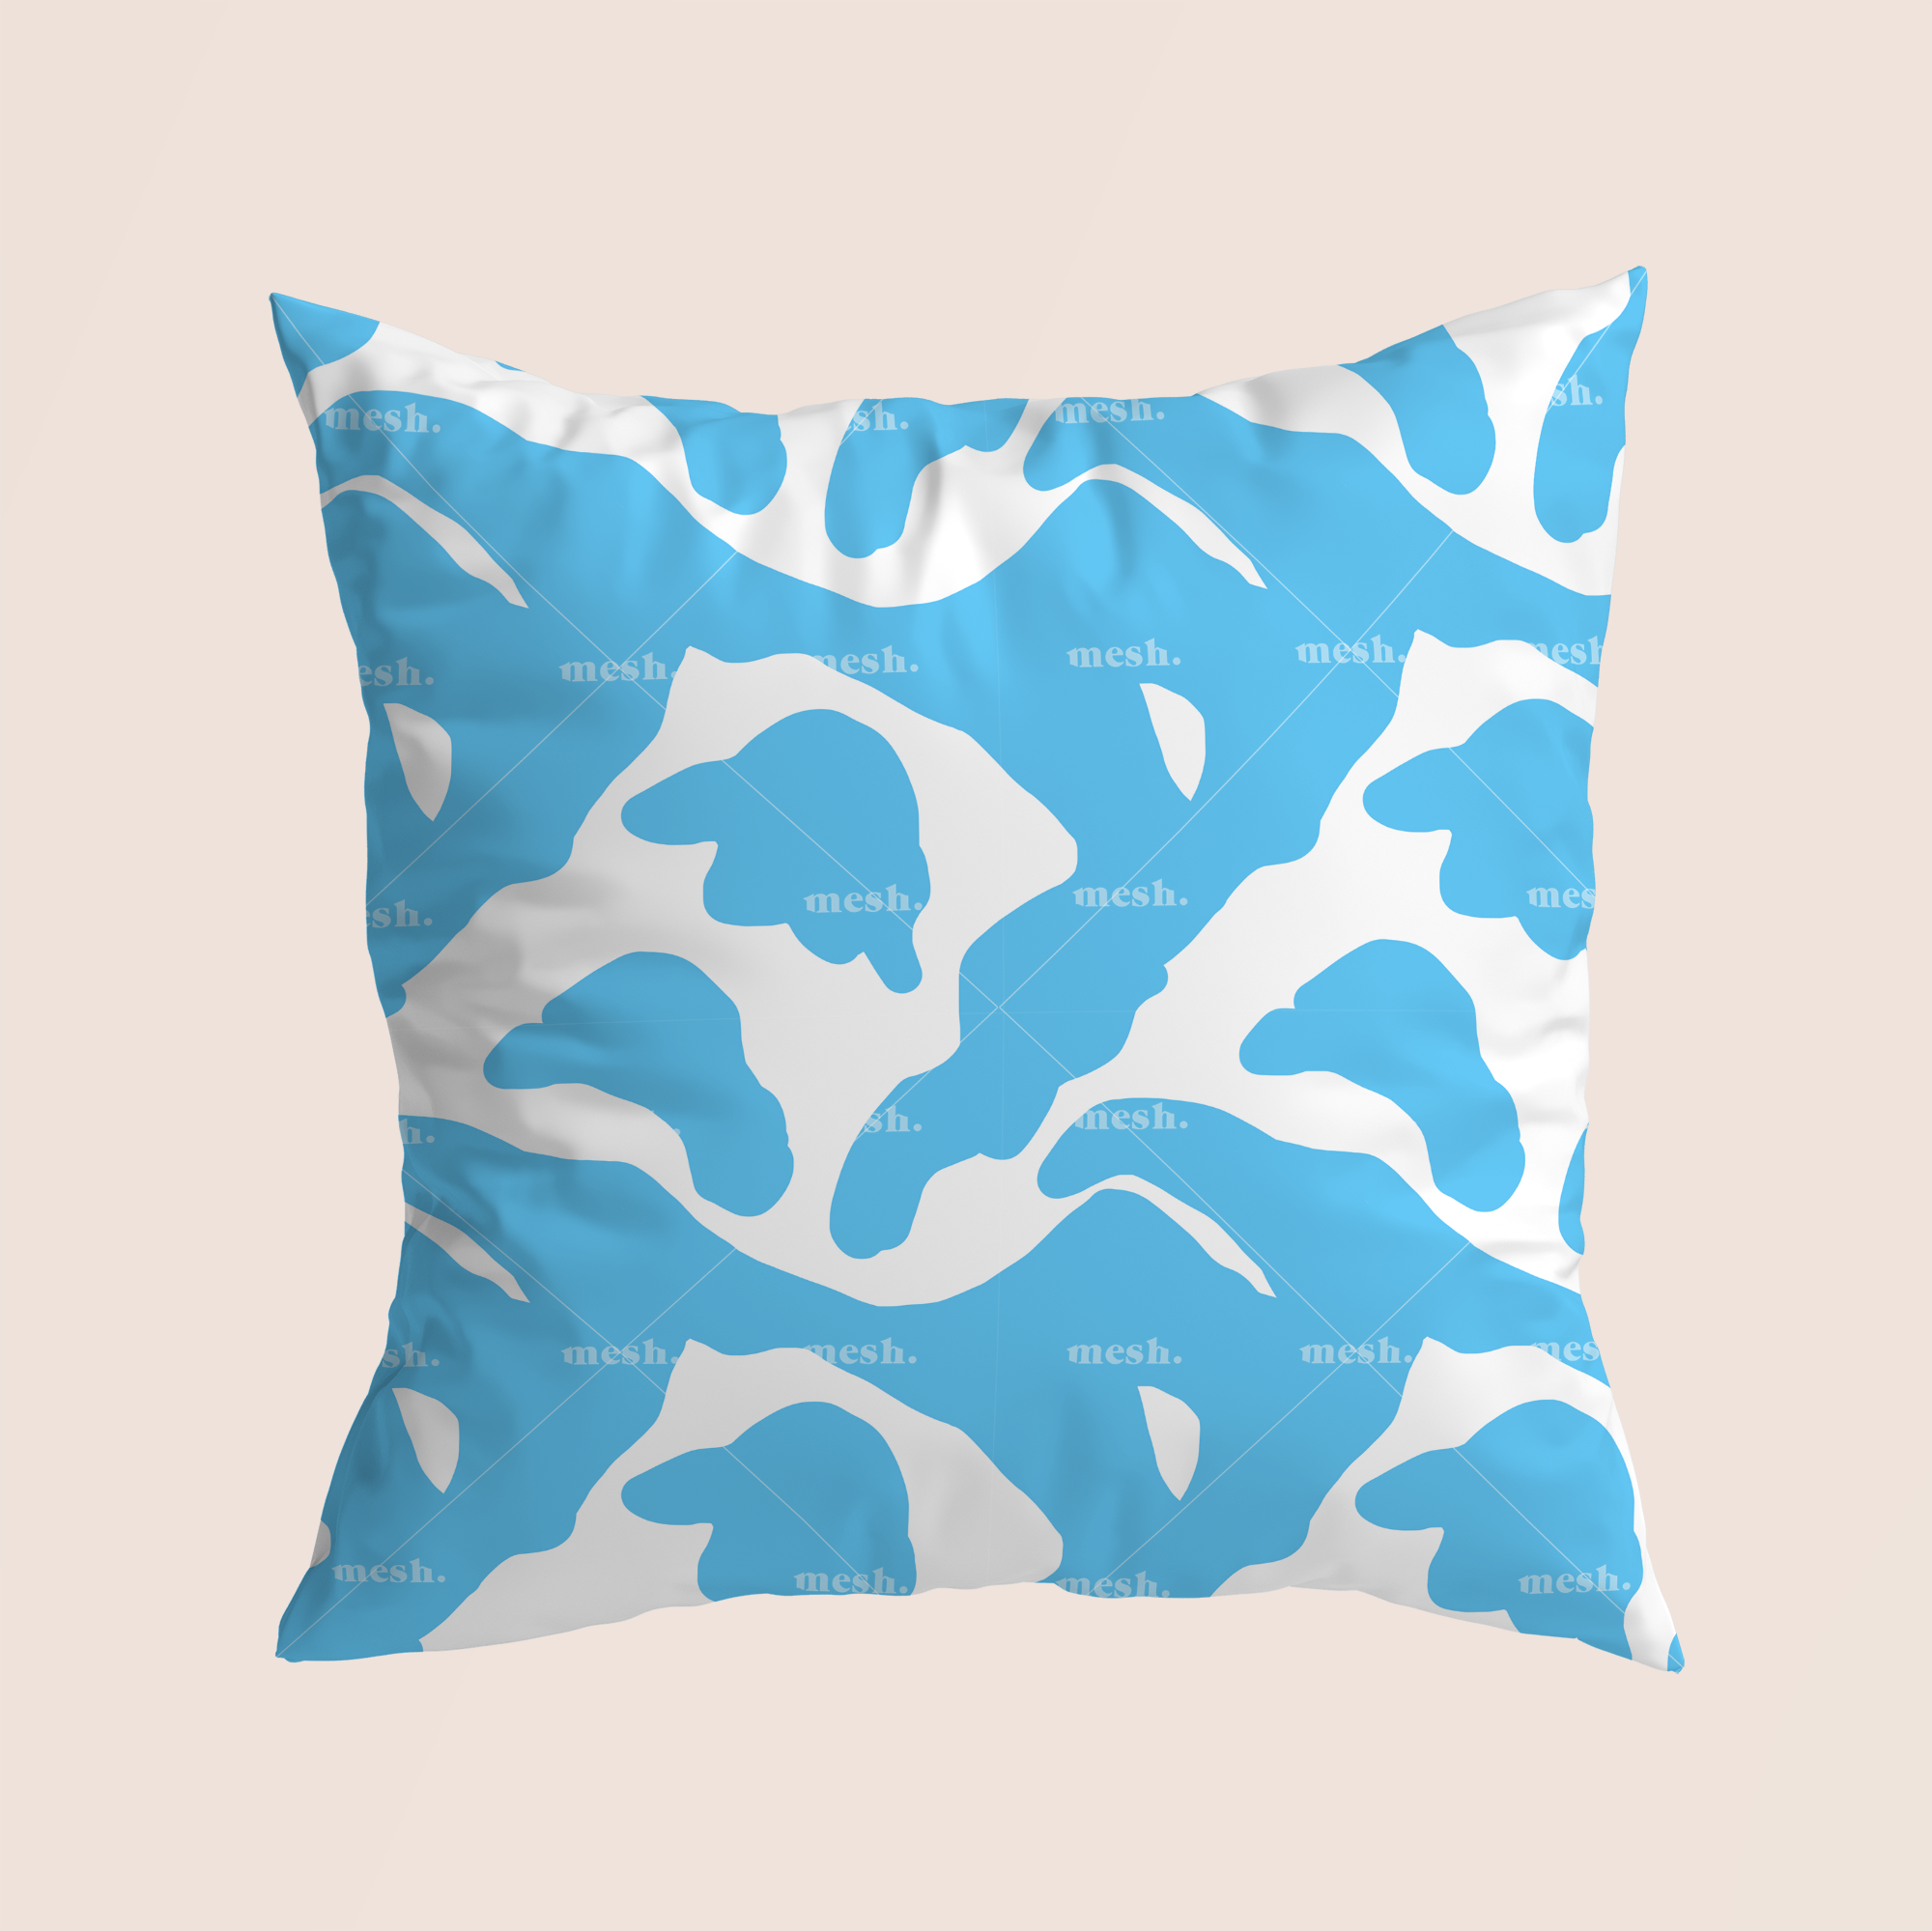 Blue spots in blue pattern design printed on recycled fabric canvas mockup